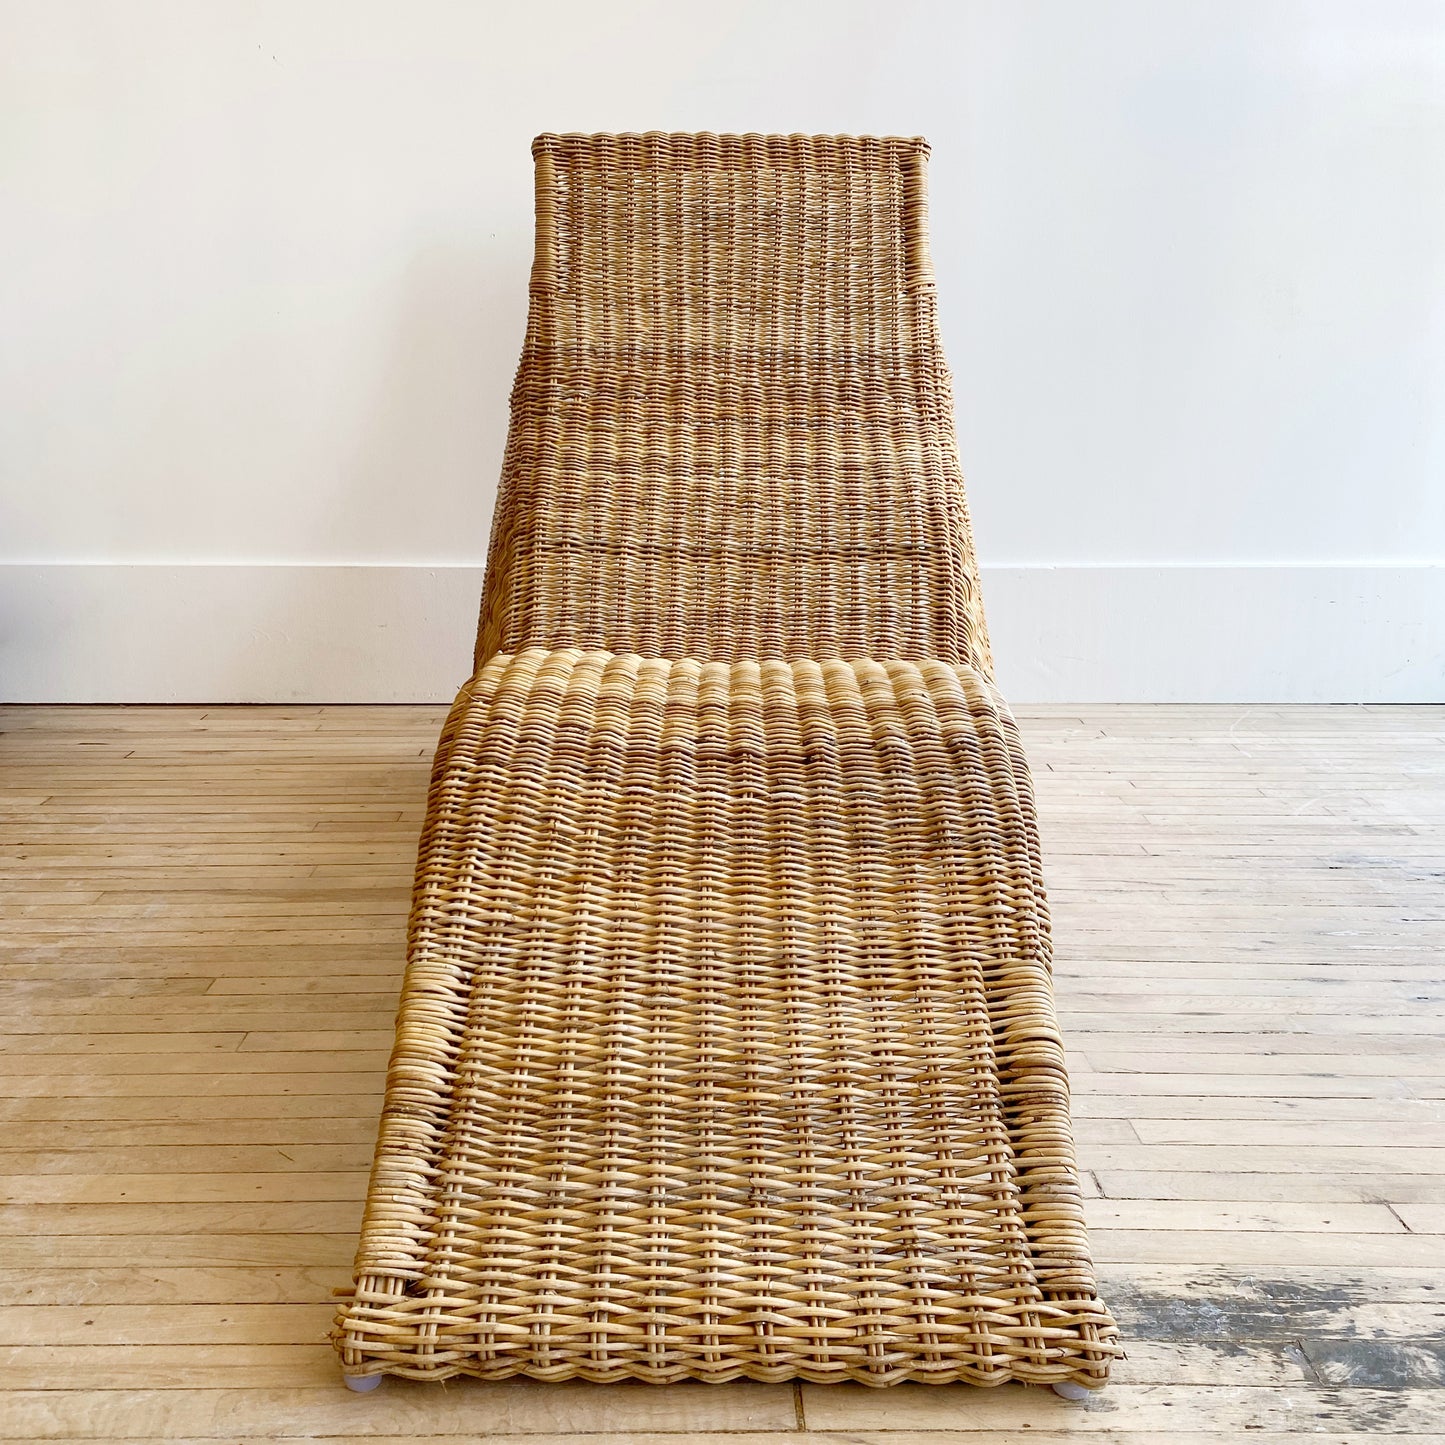 Vintage Sculptural Wicker Chaise Lounge Chair